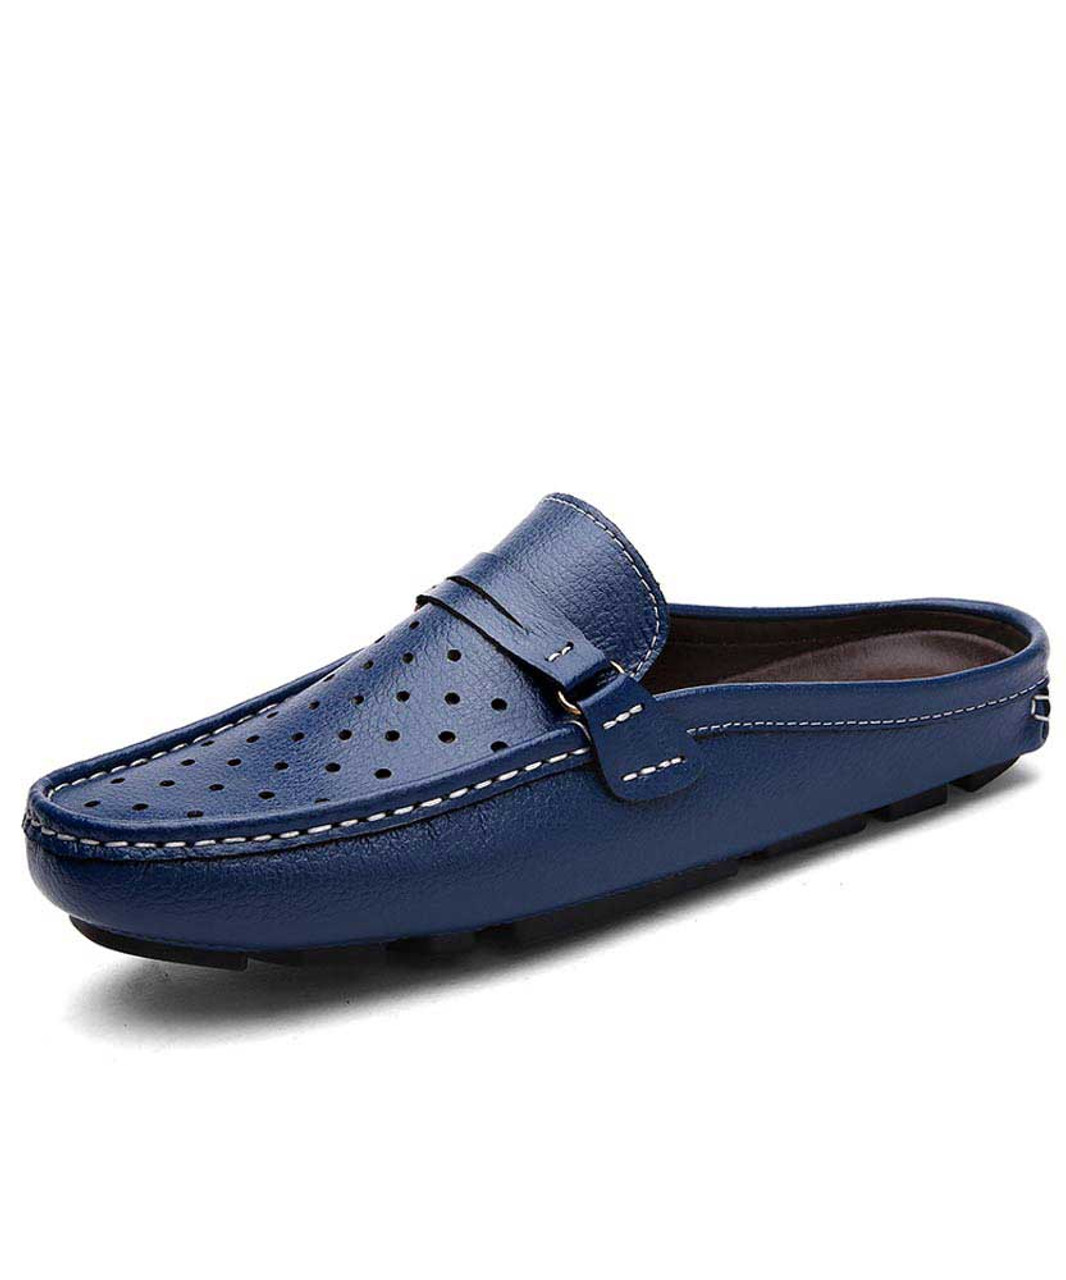 mens blue leather shoes uk